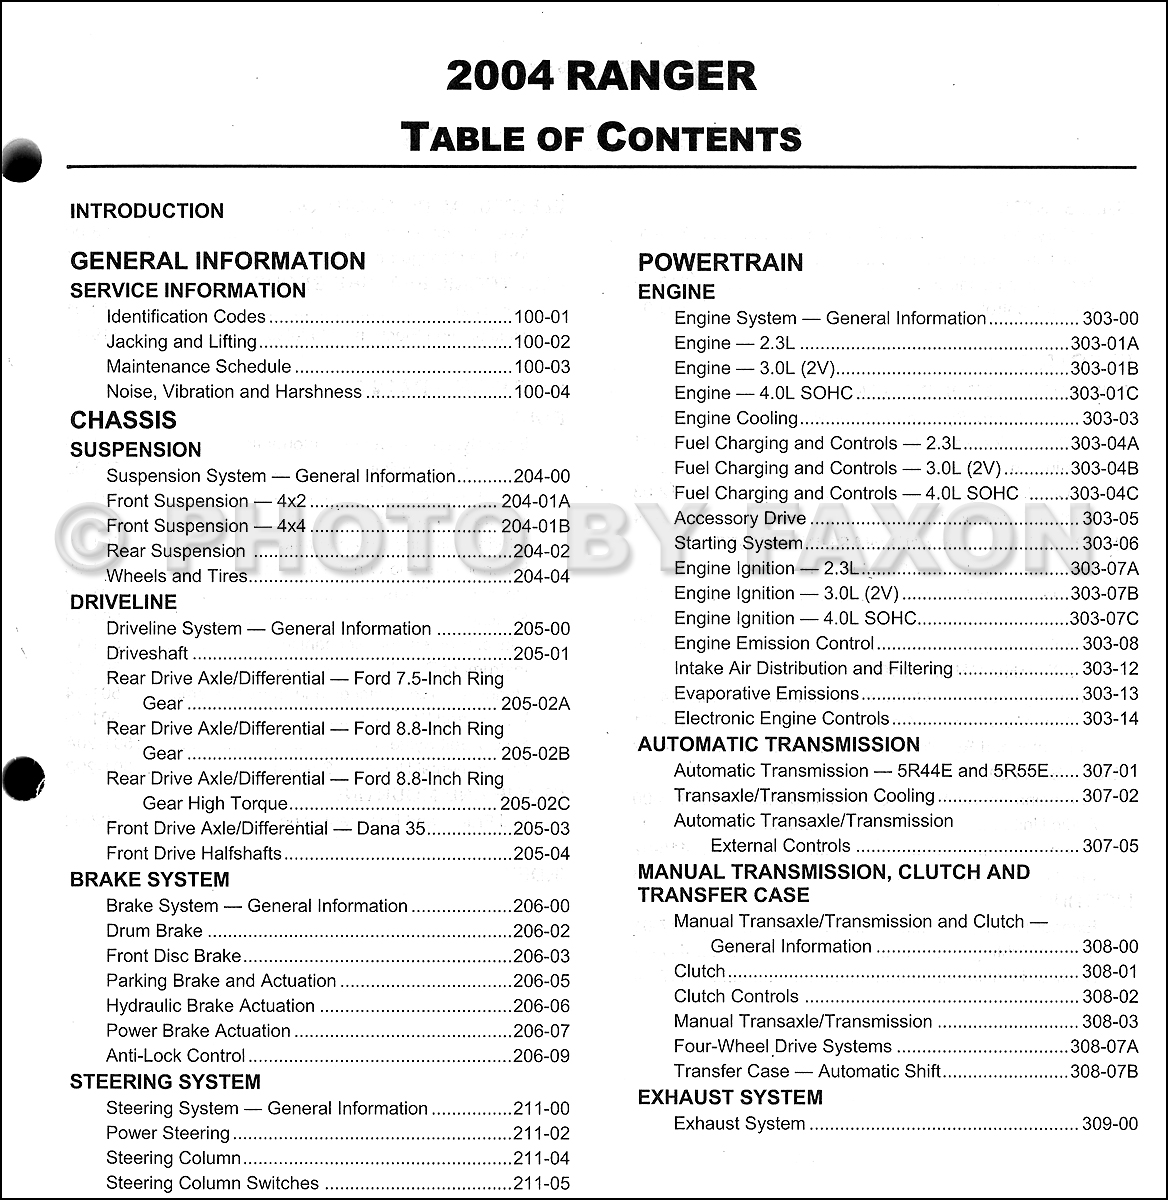 2004 Ford ranger edge owners manual pdf #8